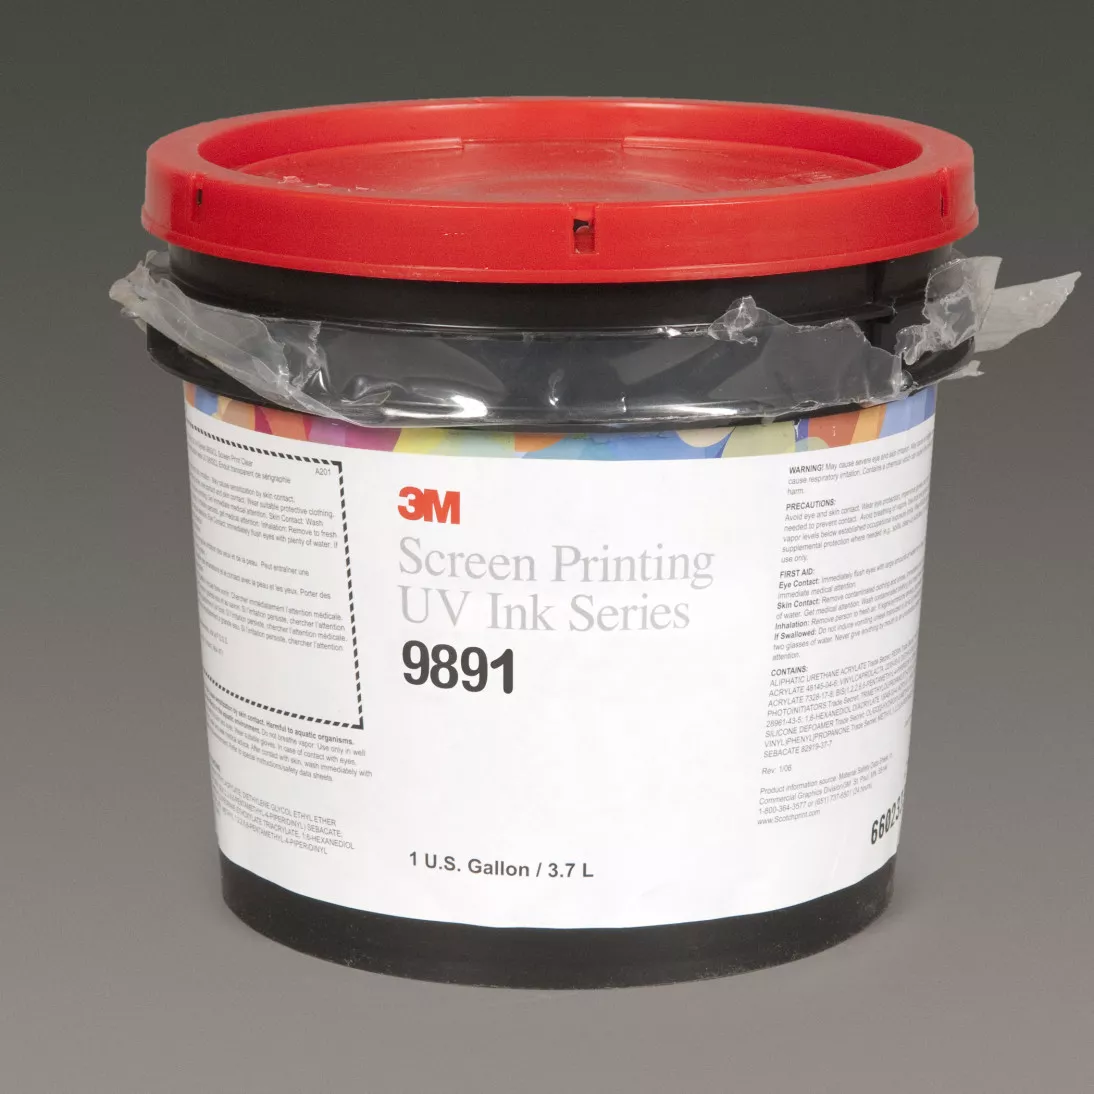 3M™ Screen Printing UV Ink 9891, Blue Violet, 1 Gallon Container